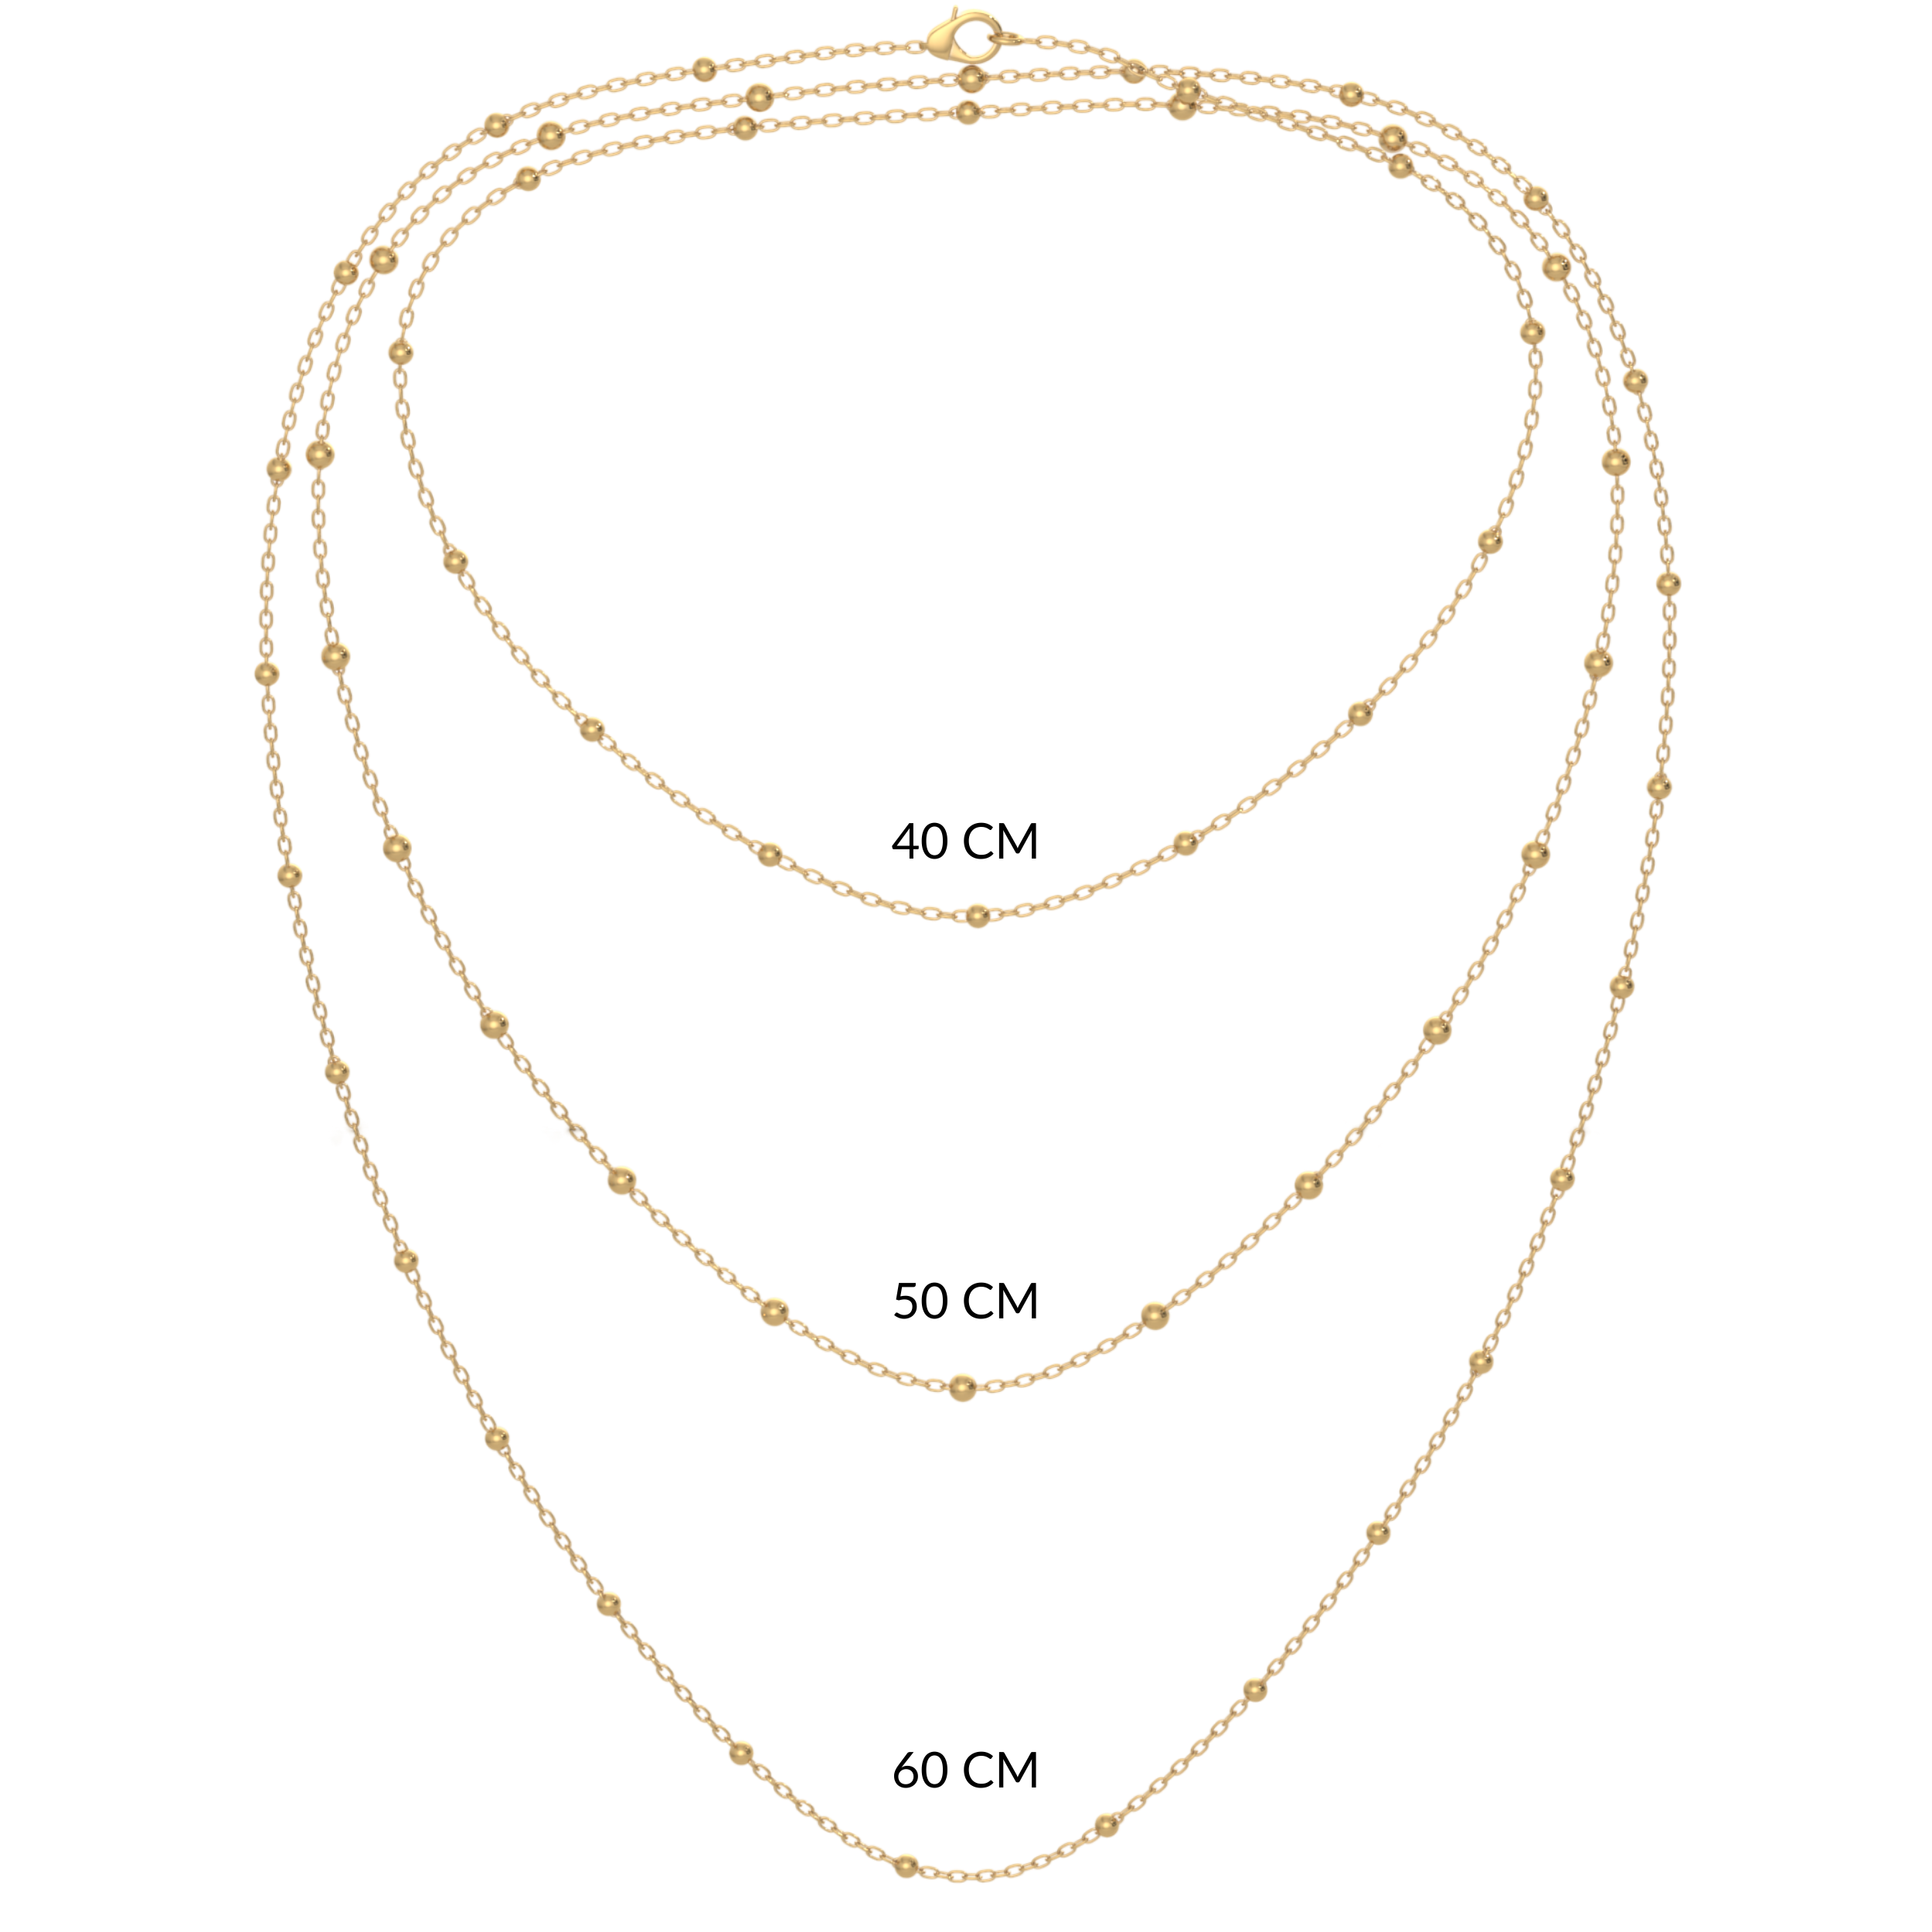 Beaded Chain Layers Example